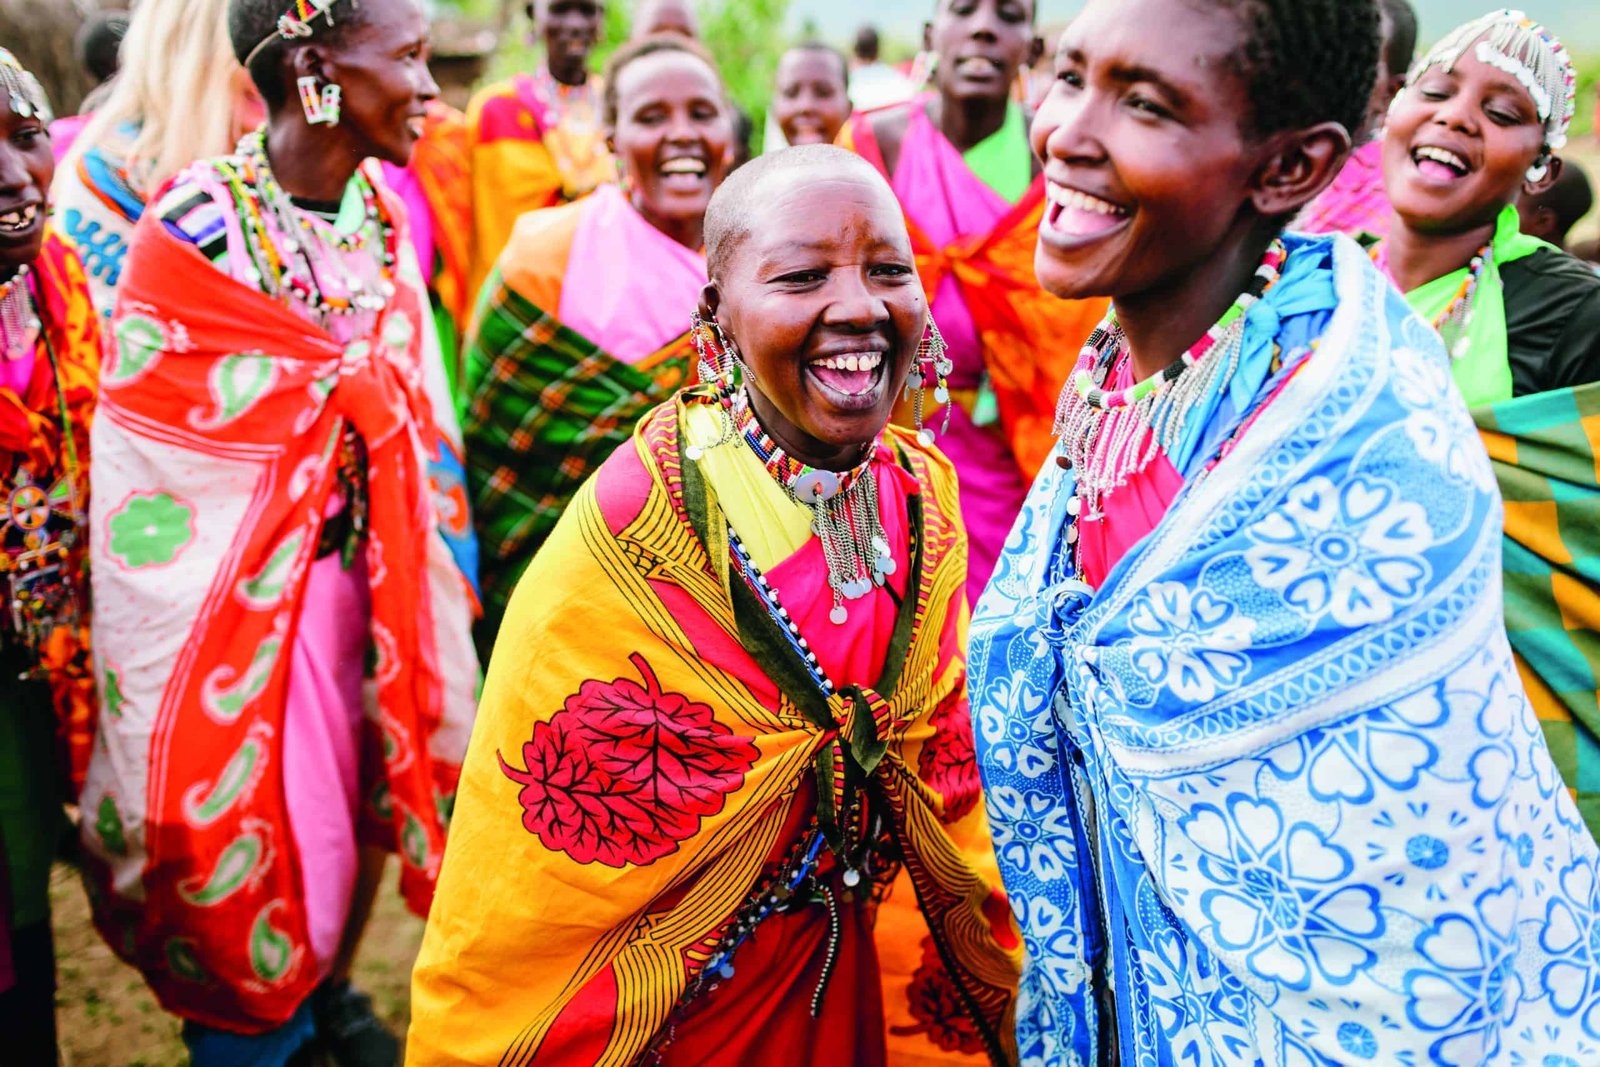 A group of wild women dressed in colorful cloths.